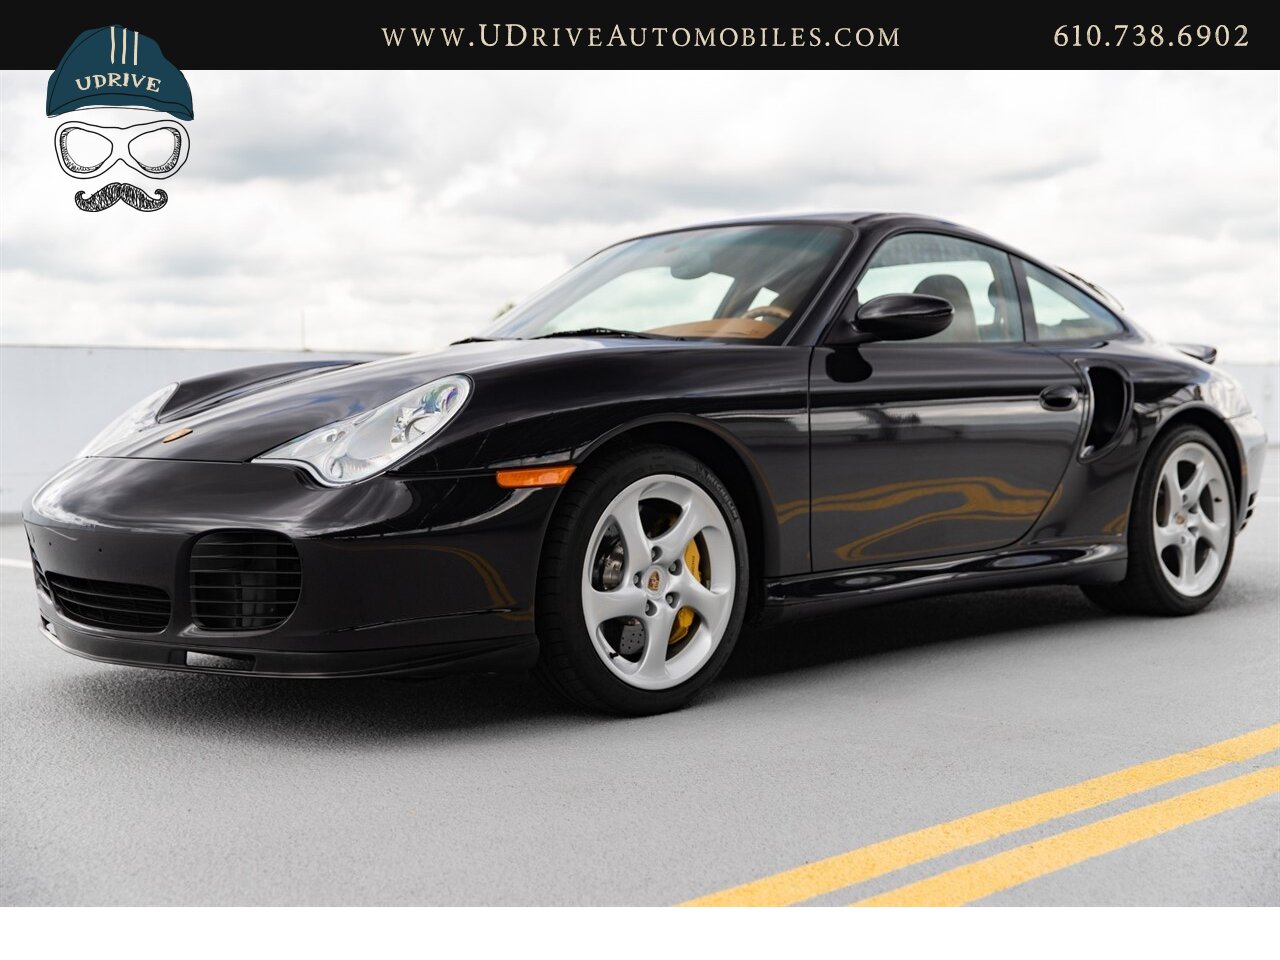 2005 Porsche 911 Turbo S 6 Speed 14k Miles Sport Sts Painted Backs  Natural Brown Lthr $144,070 MSRP - Photo 9 - West Chester, PA 19382